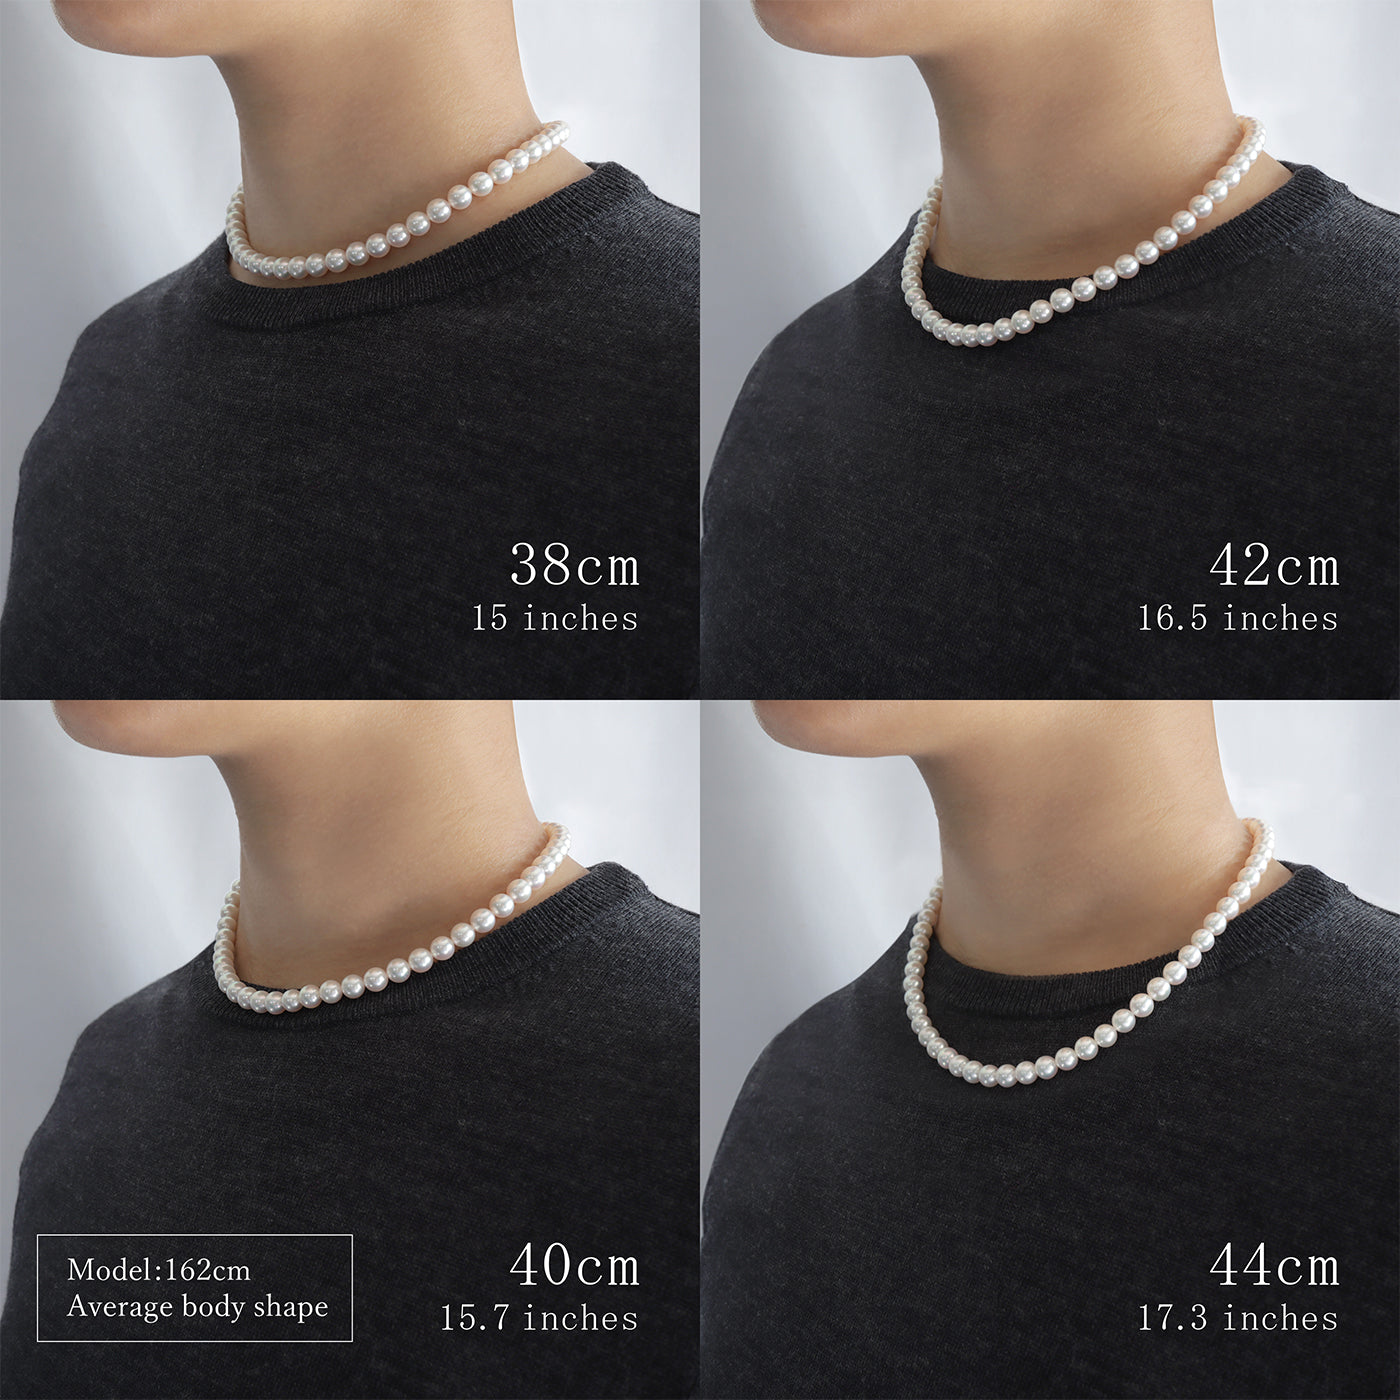 8.0-8.5mm White Akoya Pearl Necklace